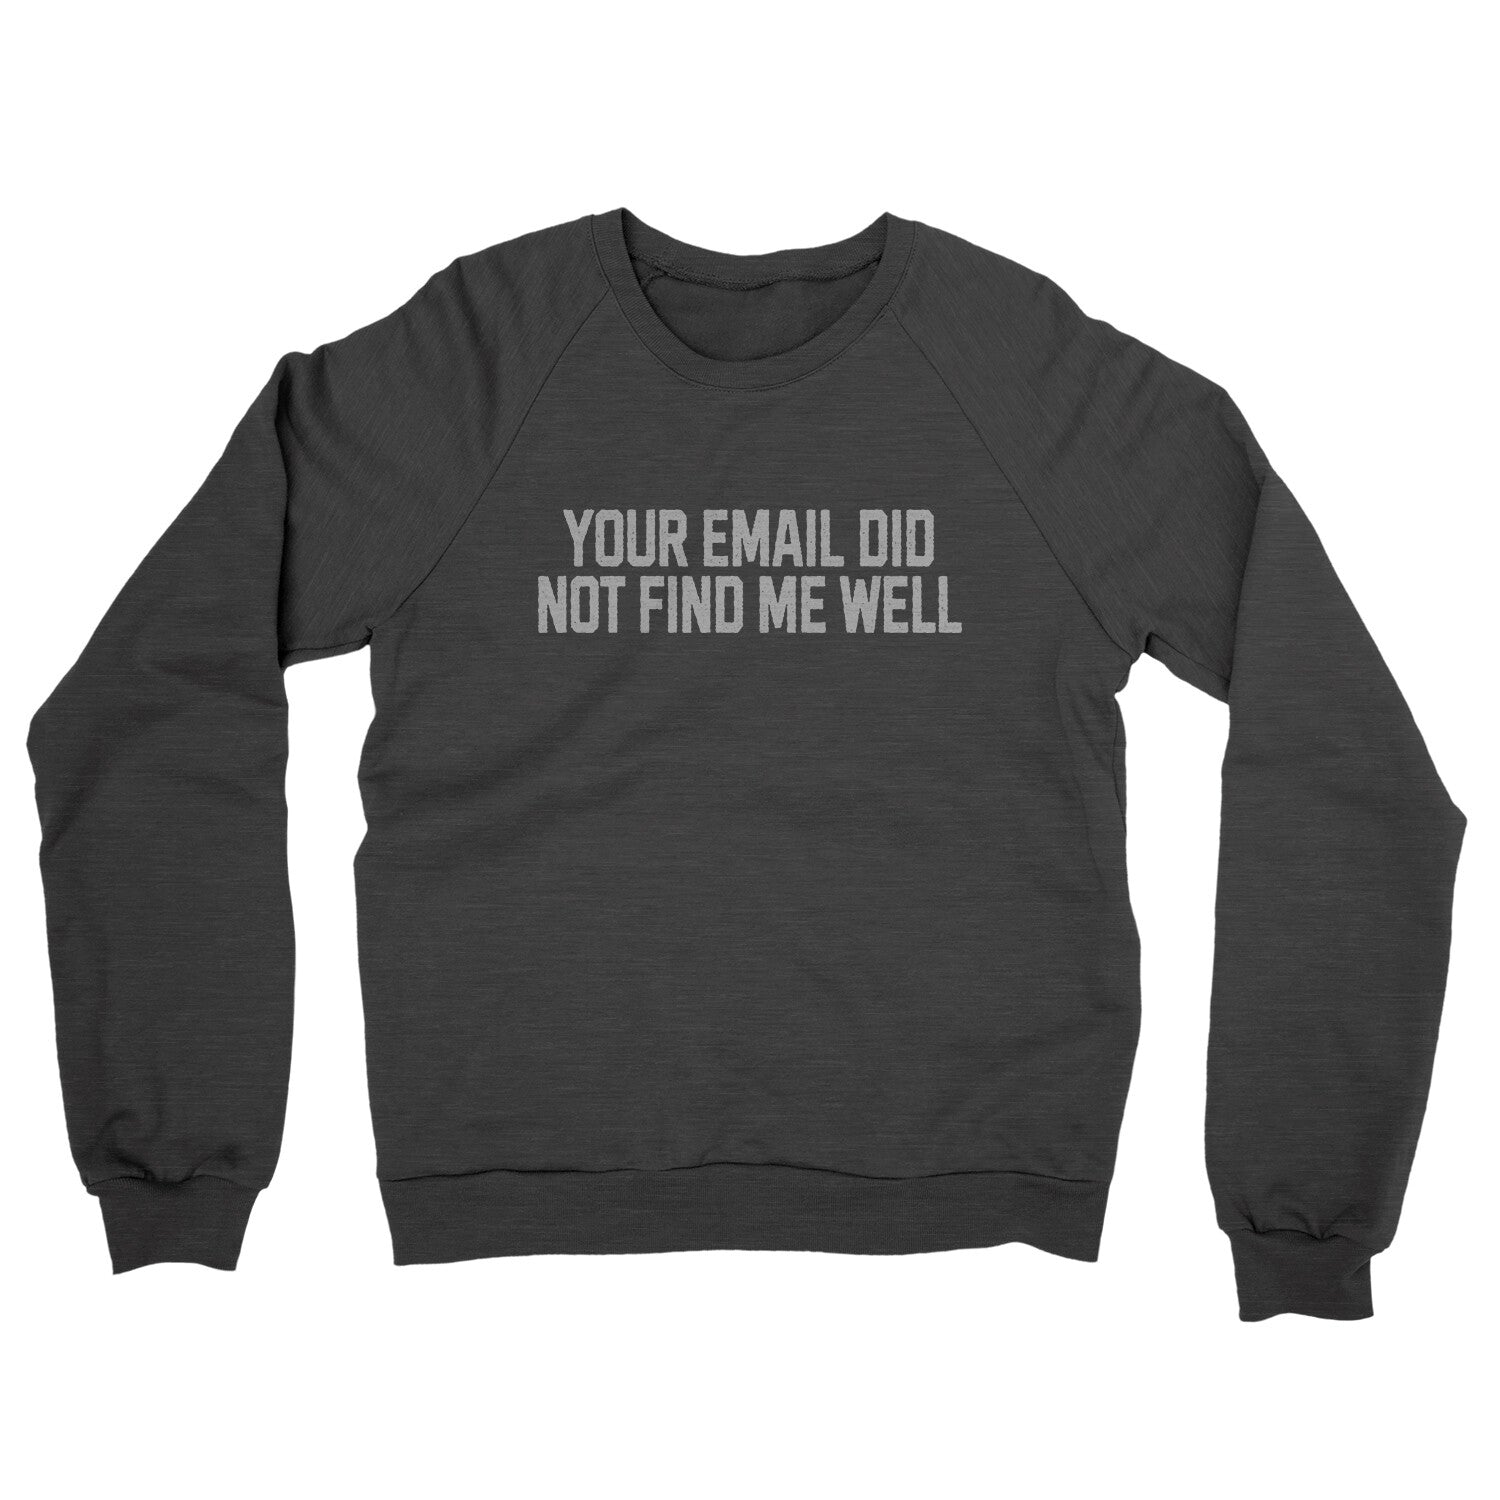 Your Email Did Not Find Me Well in Charcoal Heather Color